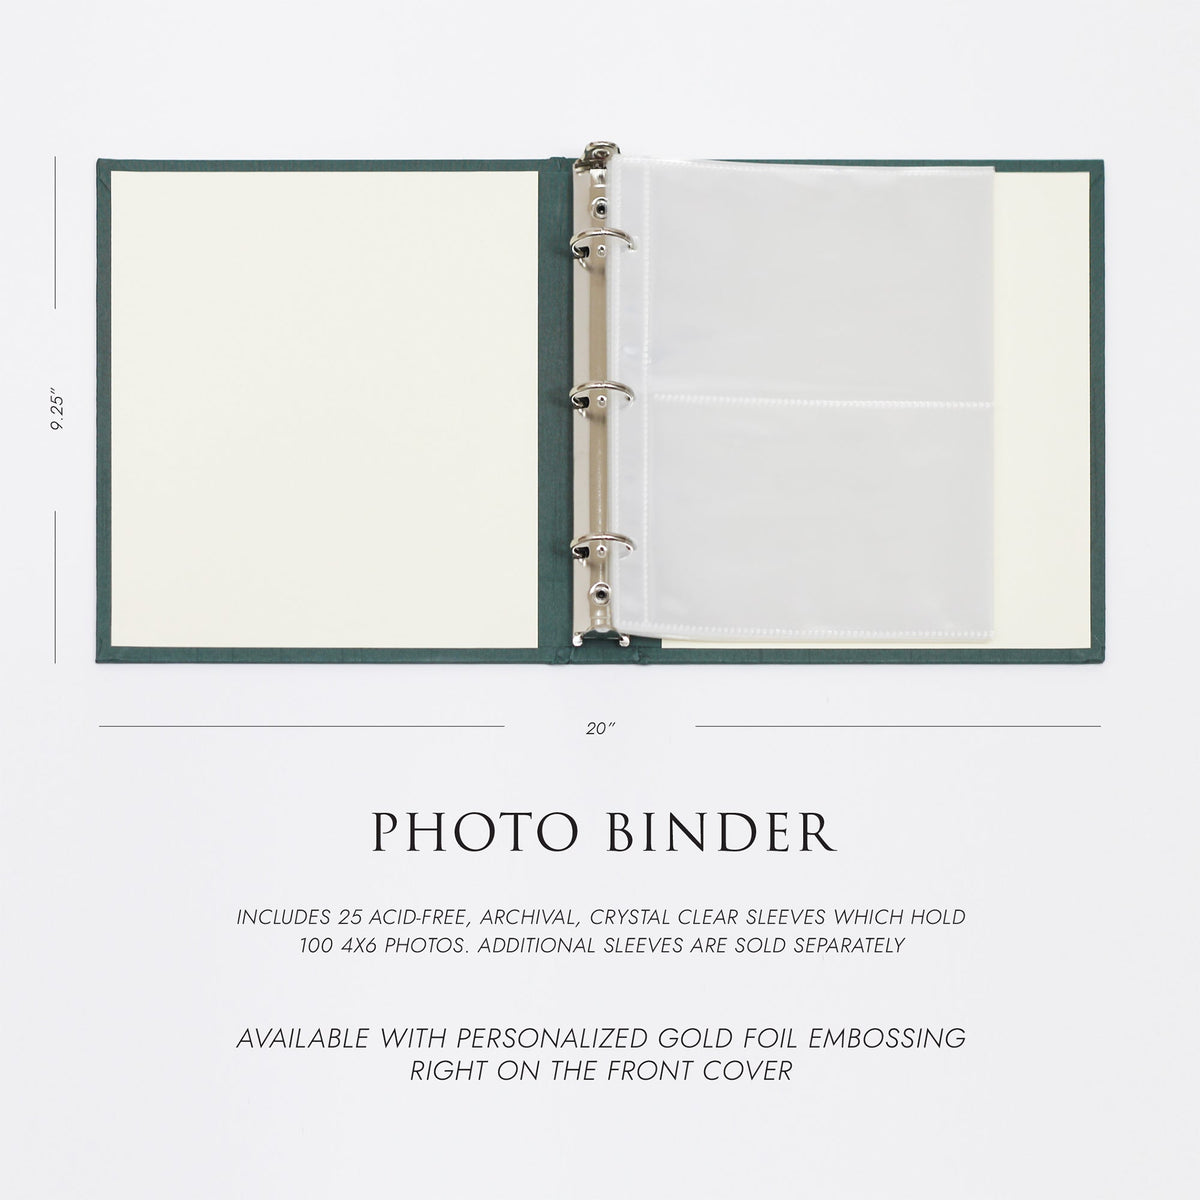 Medium Photo Binder For 4x6 Photos | Cover: Celery Cotton | Available Personalized